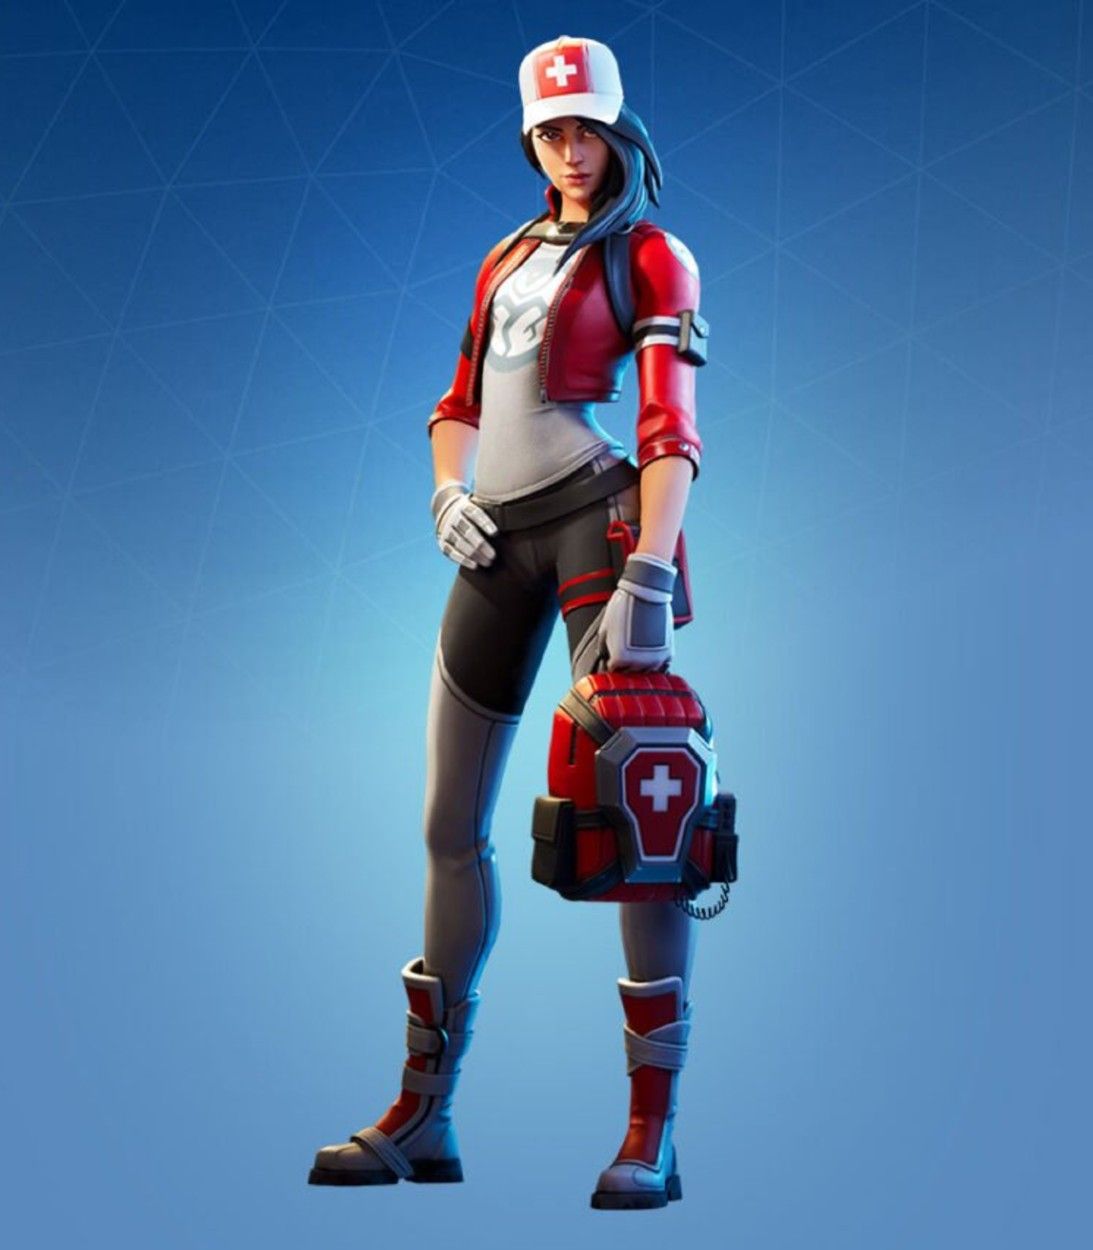 Remedy, one of the NPC quest-givers in Fortnite